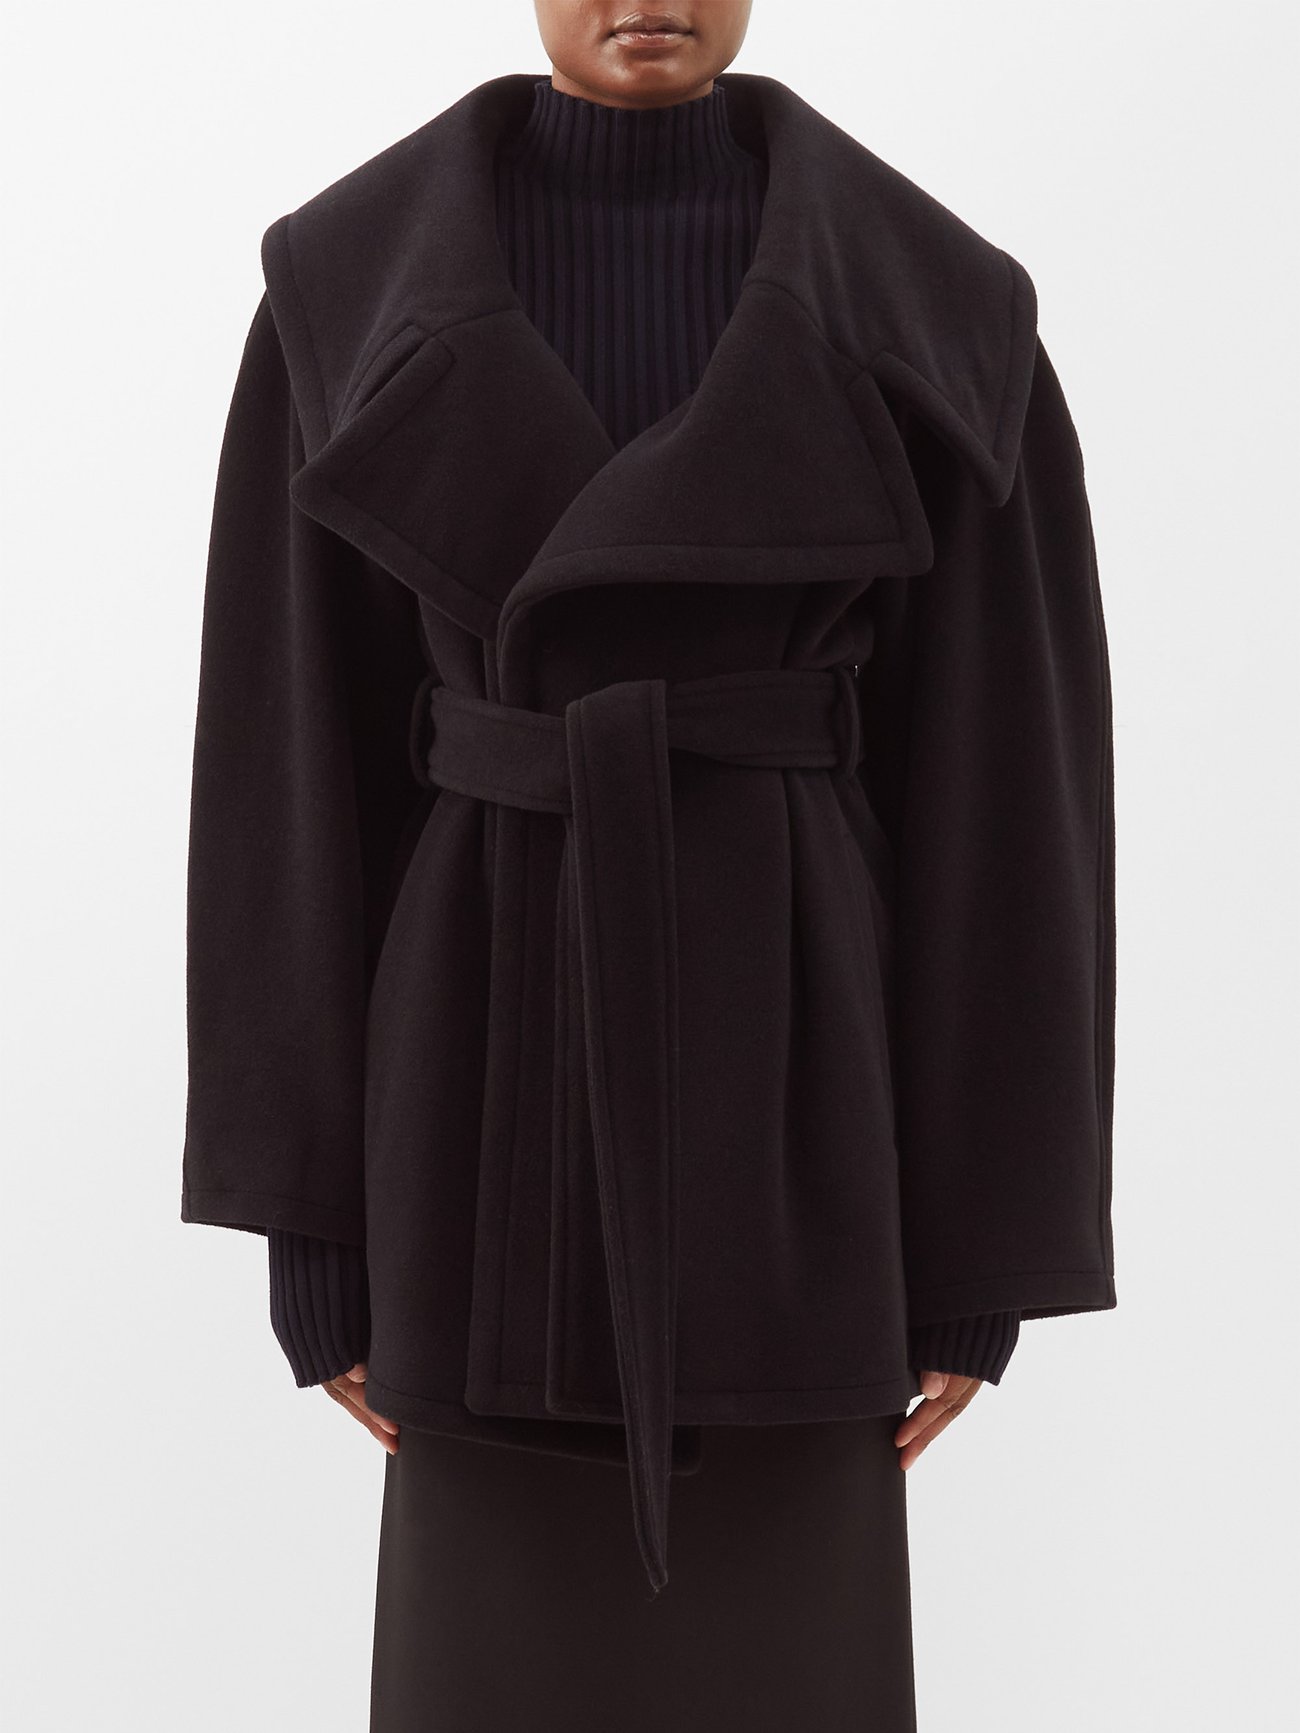 Balenciaga’s black alpaca and wool-blend felt coat features exaggerated notch lapels that envelope the shoulders and an elegant wrap shape that's cinched with the self-tie belt.